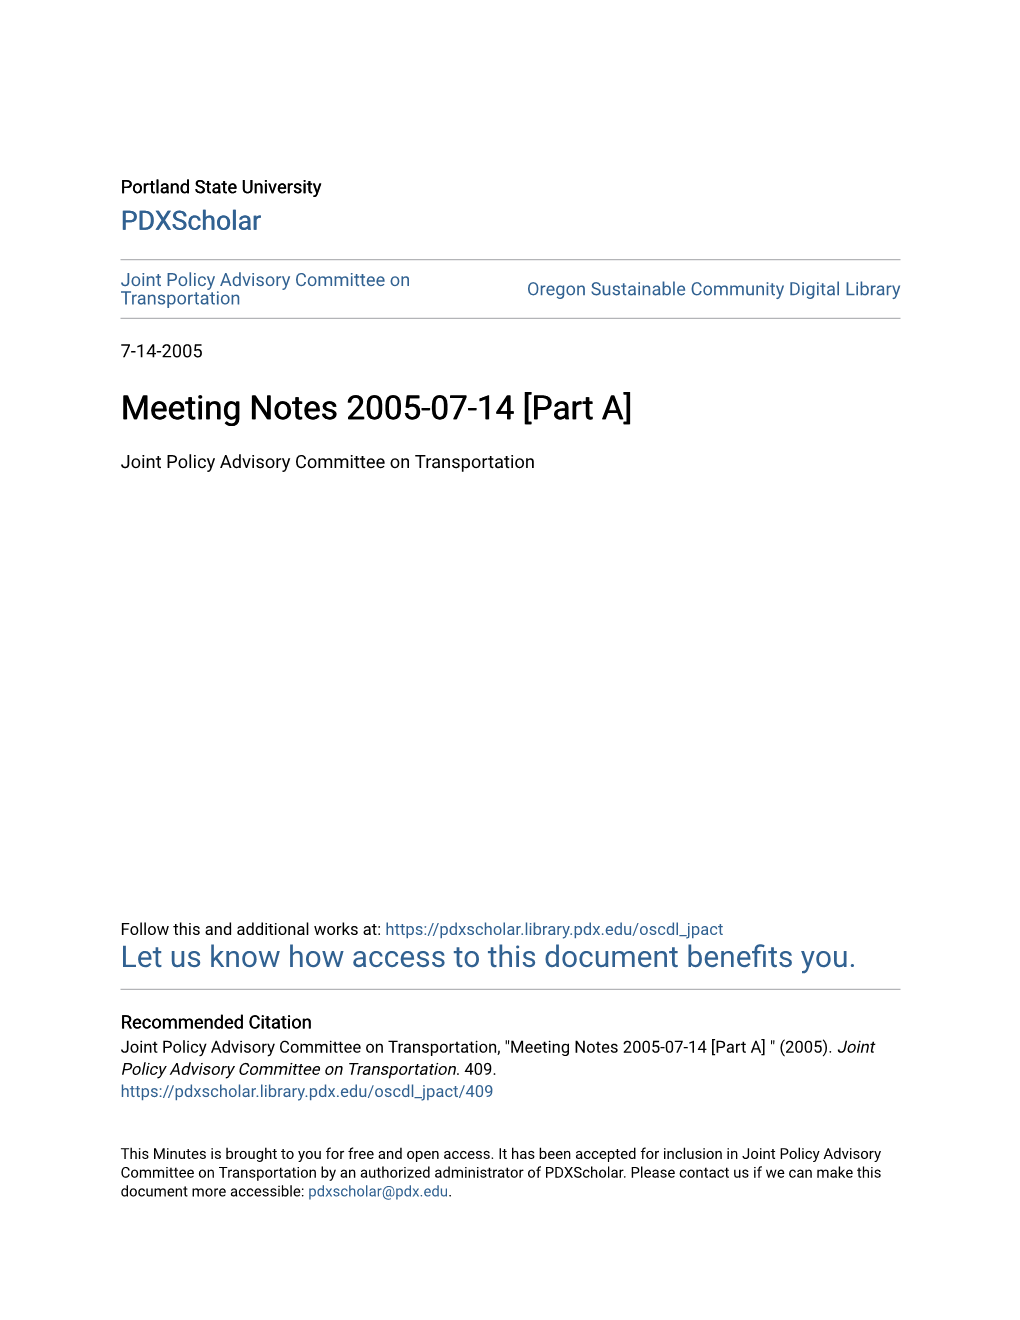 Meeting Notes 2005-07-14 [Part A]